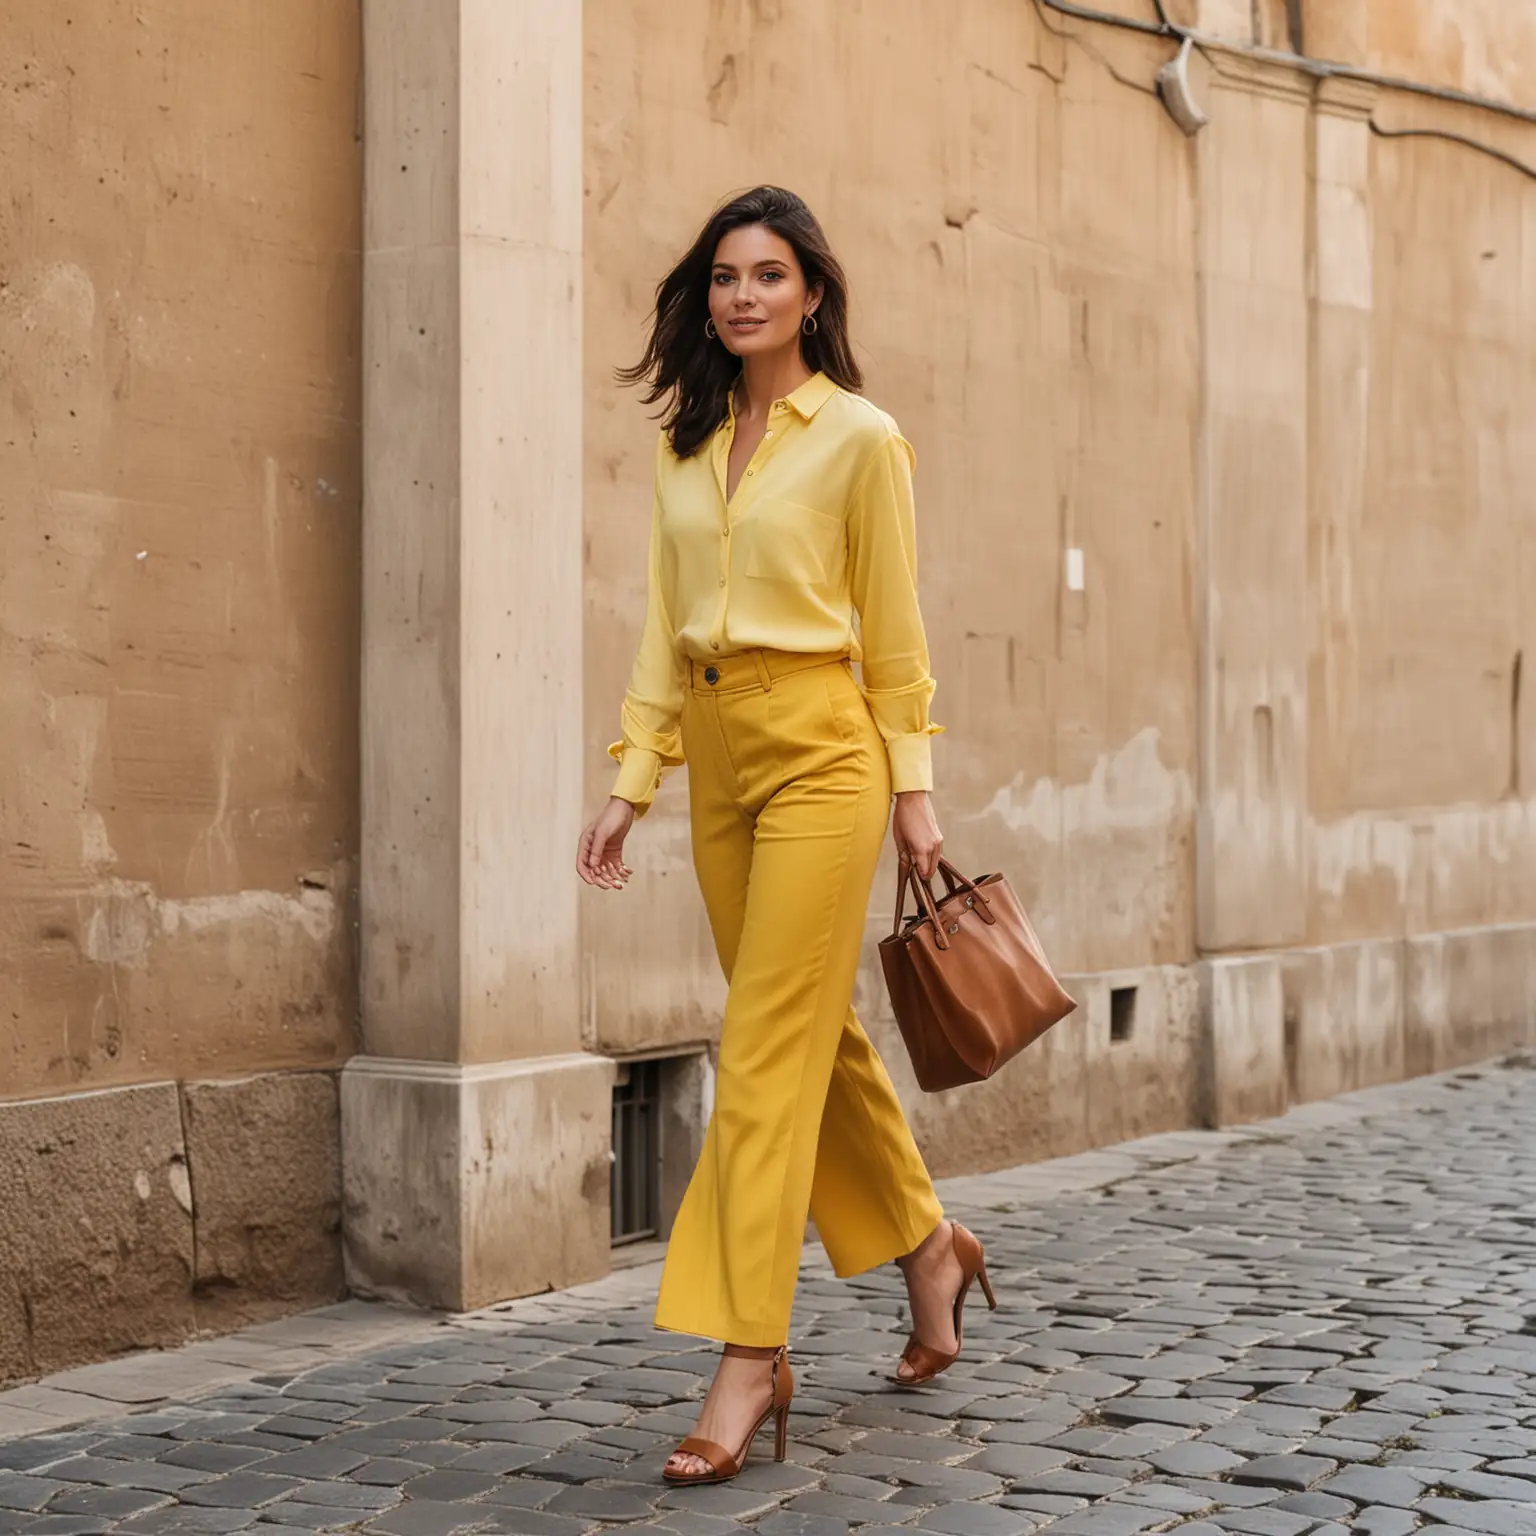 Stylish Woman in Rome Elegant Yellow Shirt and Wideleg Blue Trousers